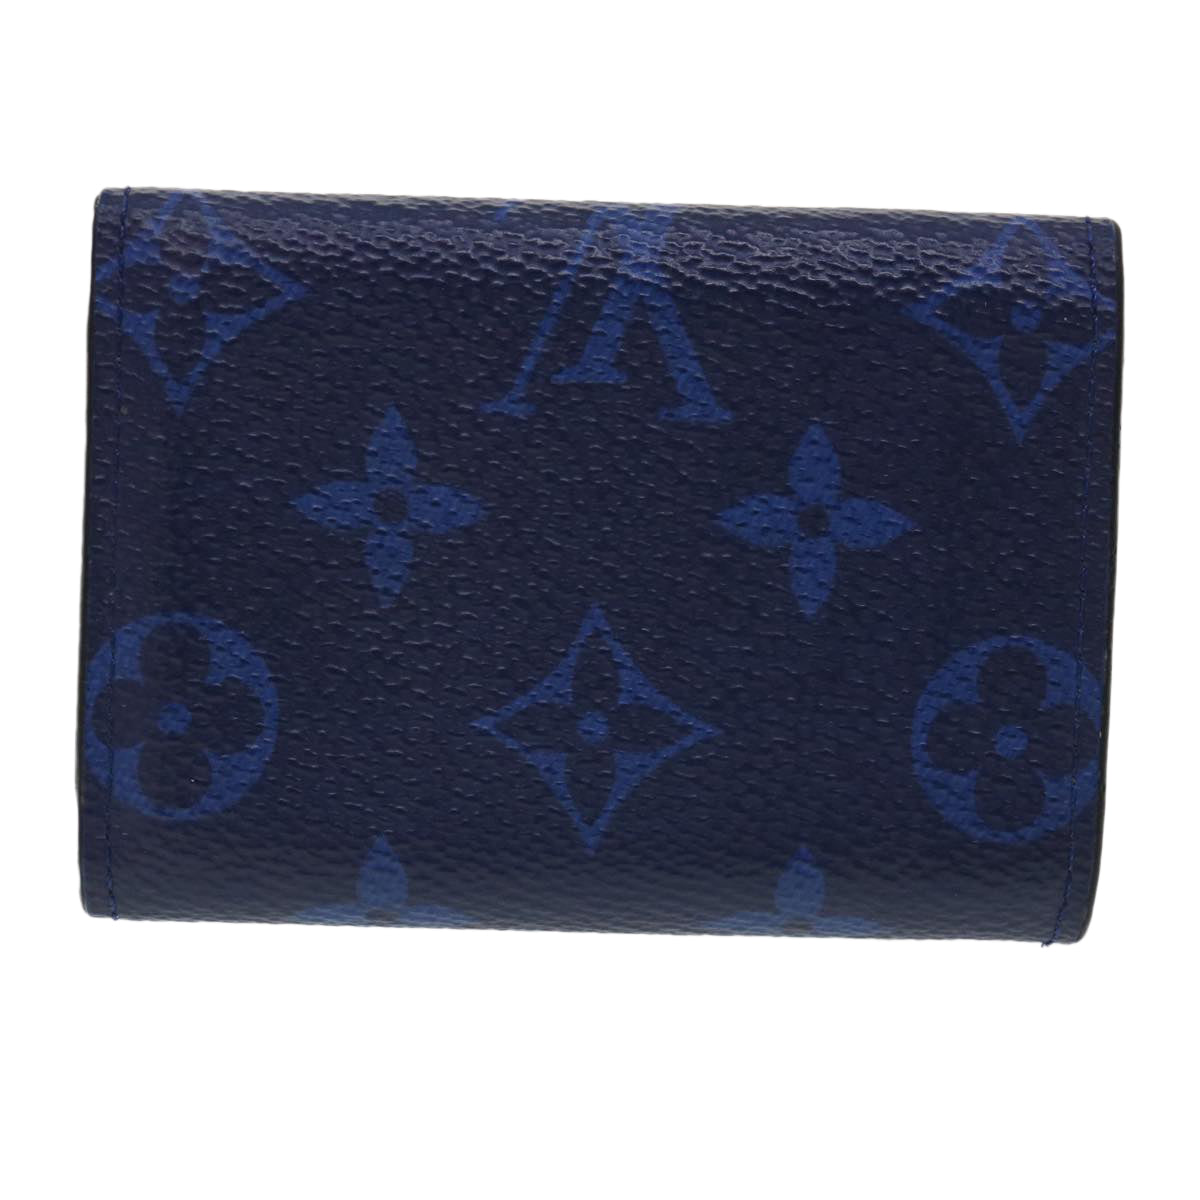 LOUIS VUITTON Taigalama Discovery compact wallet Wallet Blue LV Auth ar7670 - 0